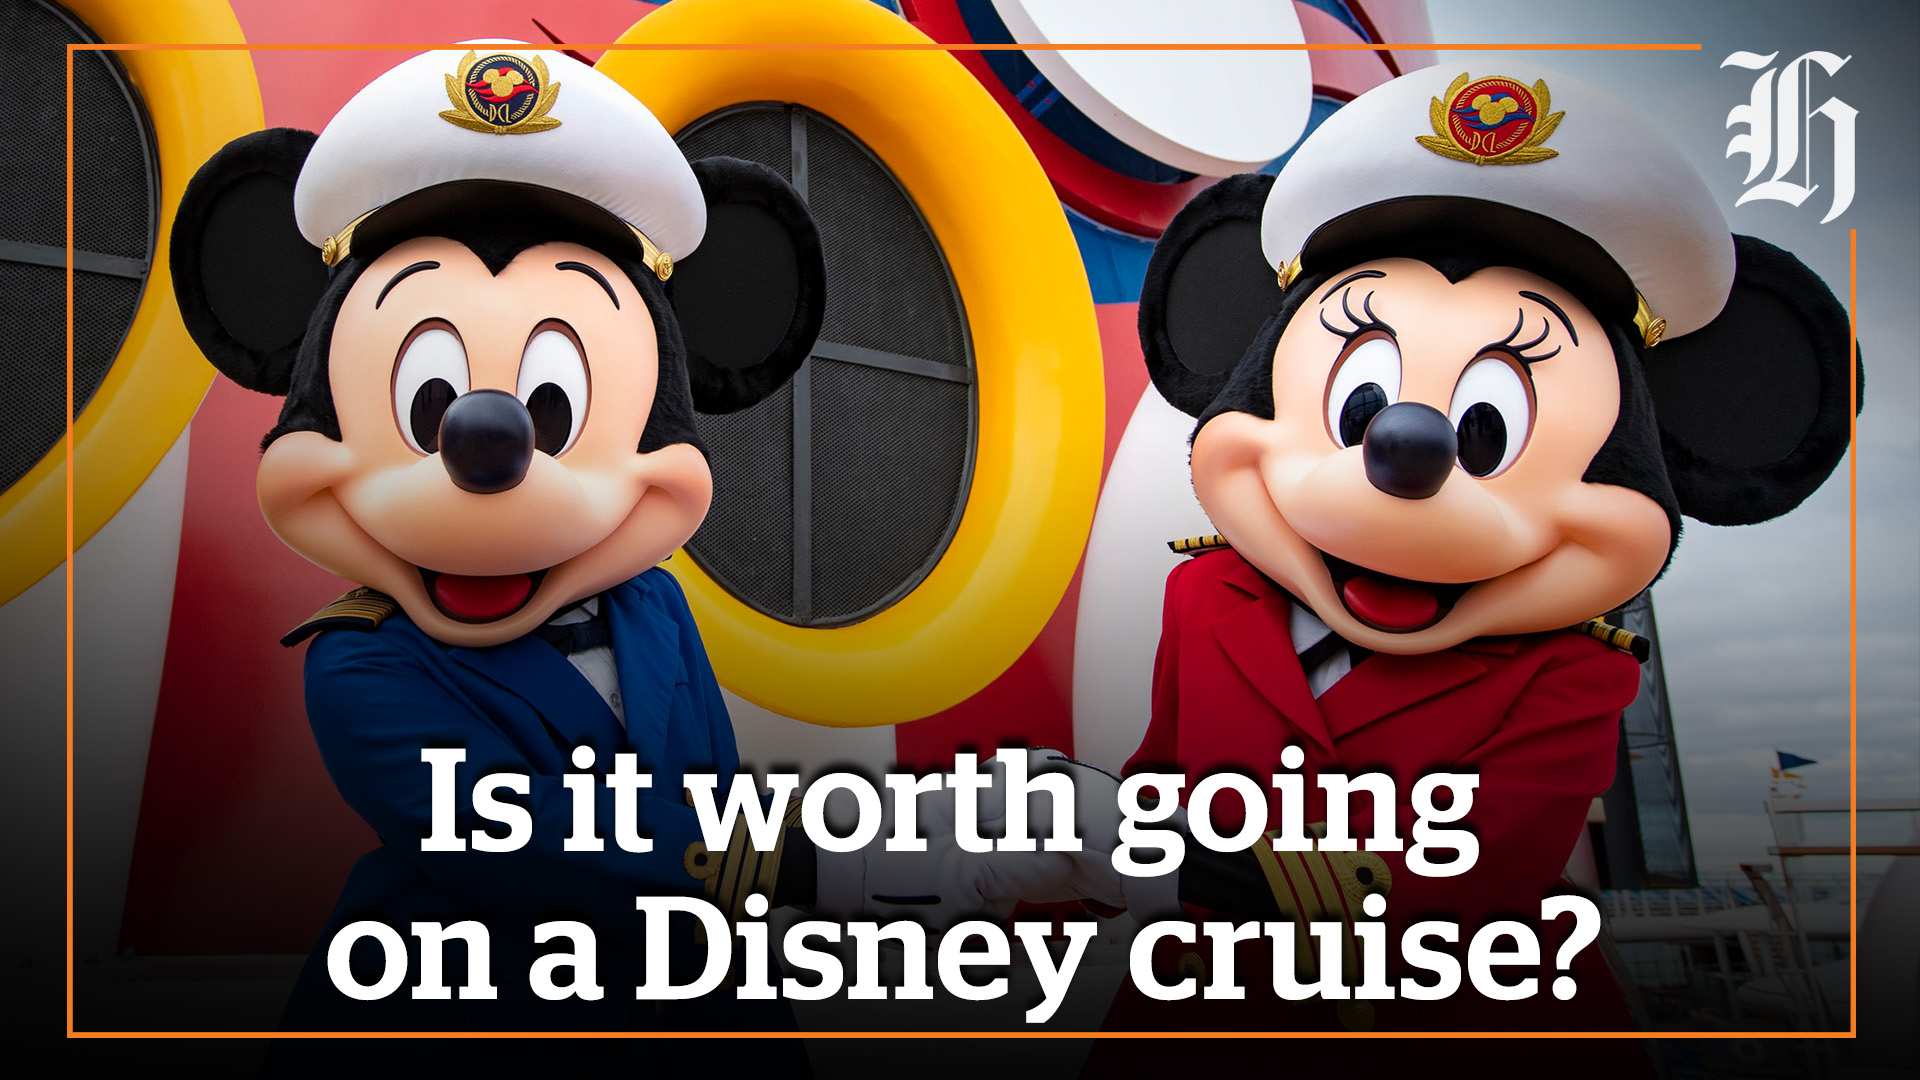 NZ　worth　going　Inside　Cruise:　a　it　cruise?　Disney　a　Disney　Is　on　Herald